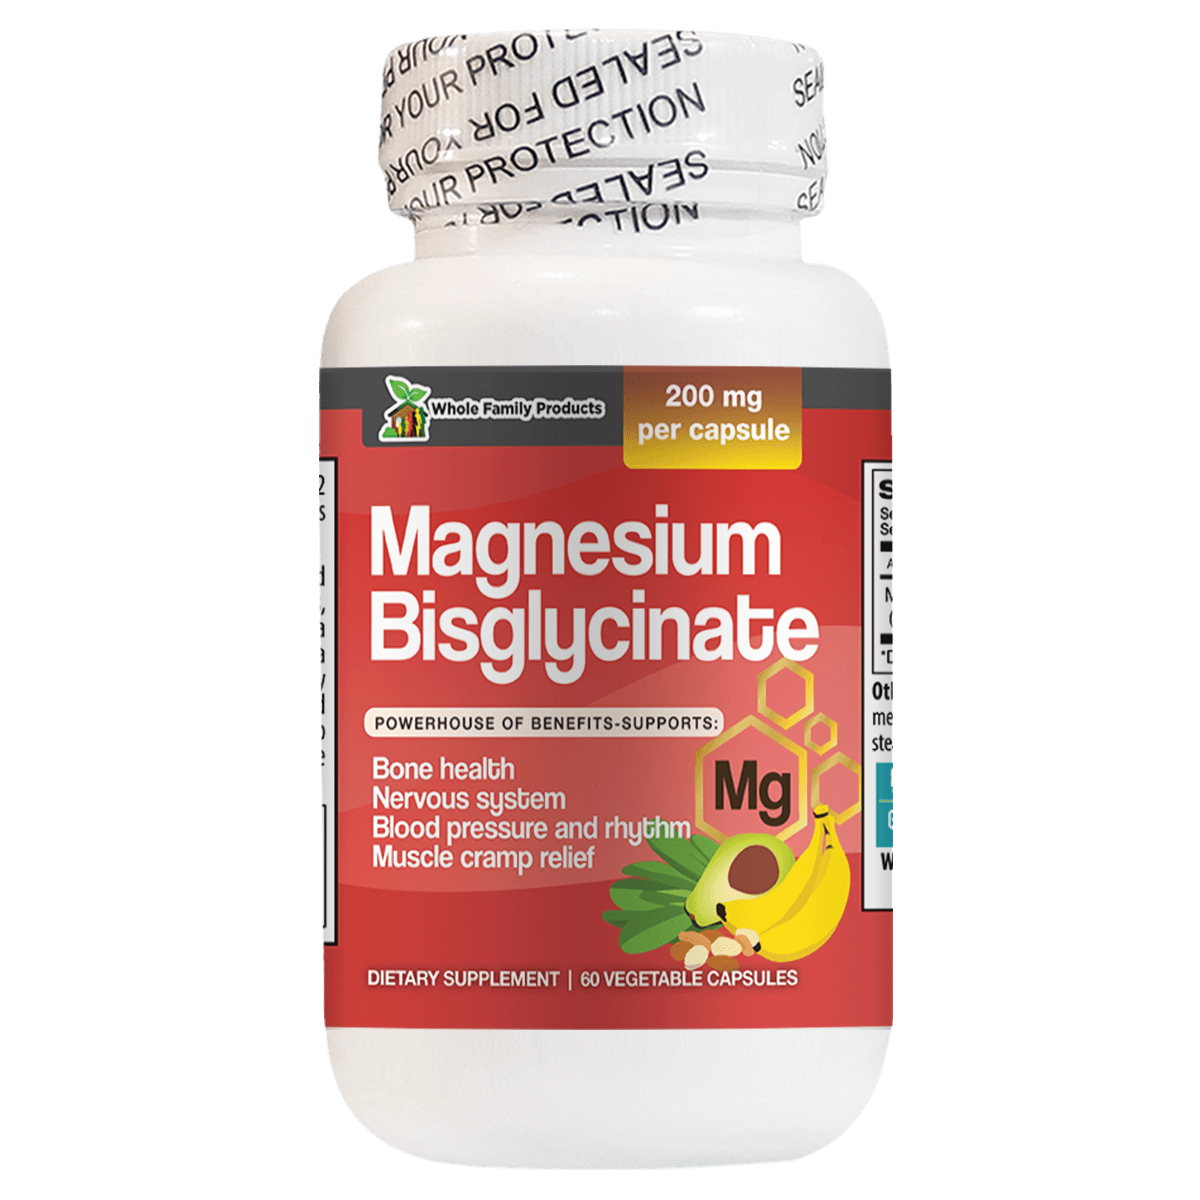 Magnesium Bisglycinate Supports Bone Health and Nervous System